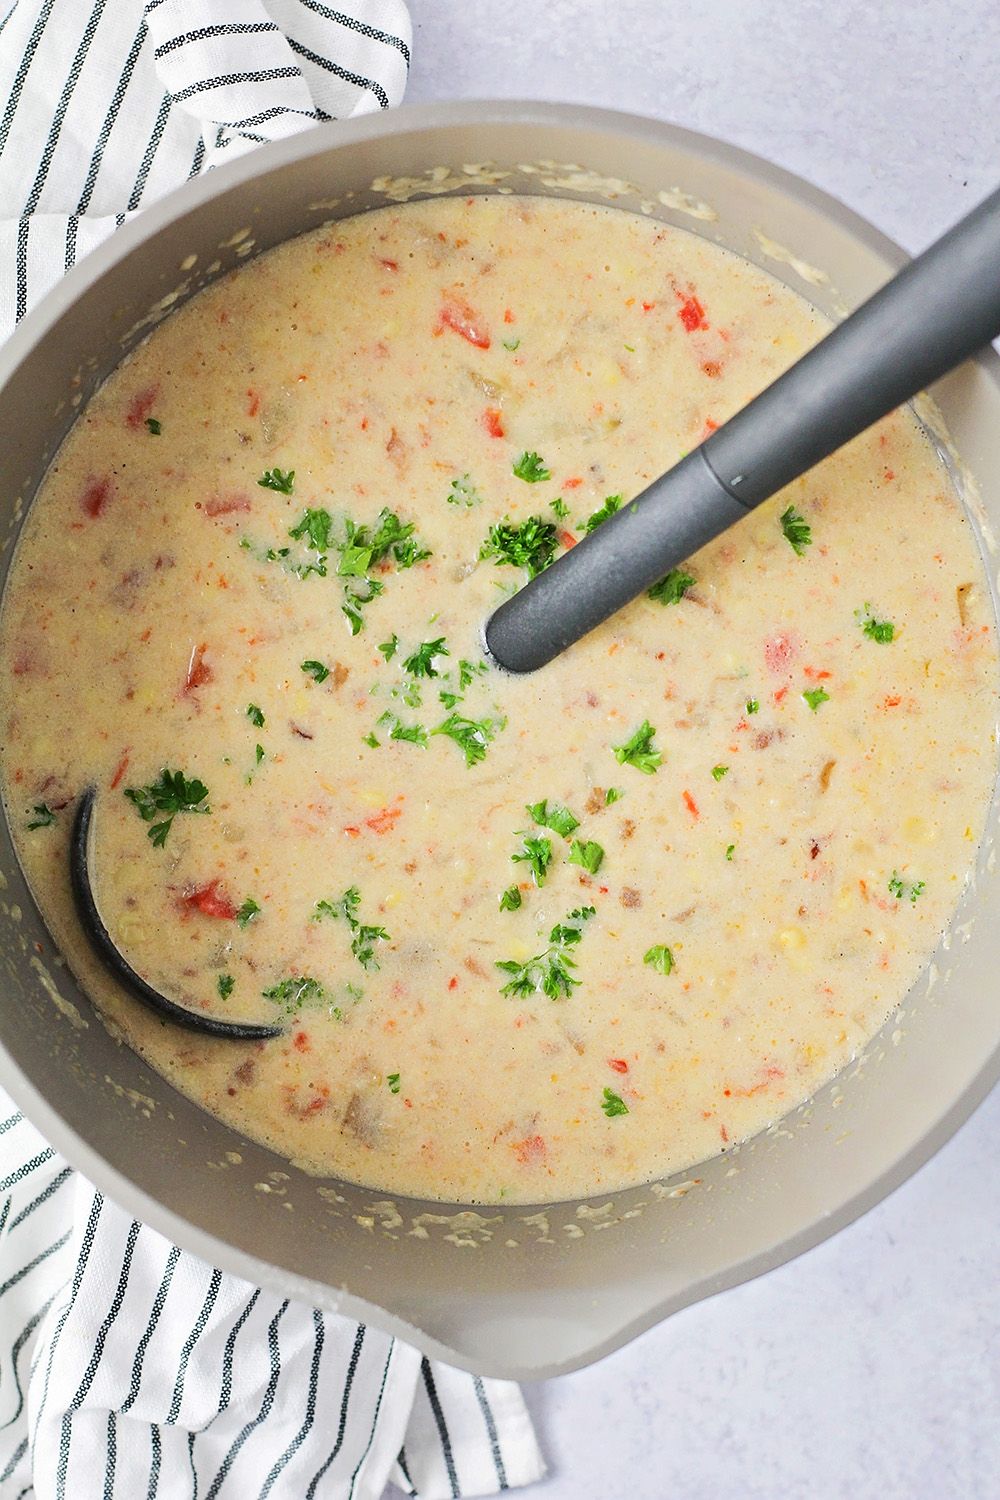 This Instant Pot summer corn chowder is a great way to enjoy a tasty soup without heating up the whole house! It's simple to make and so delicious!